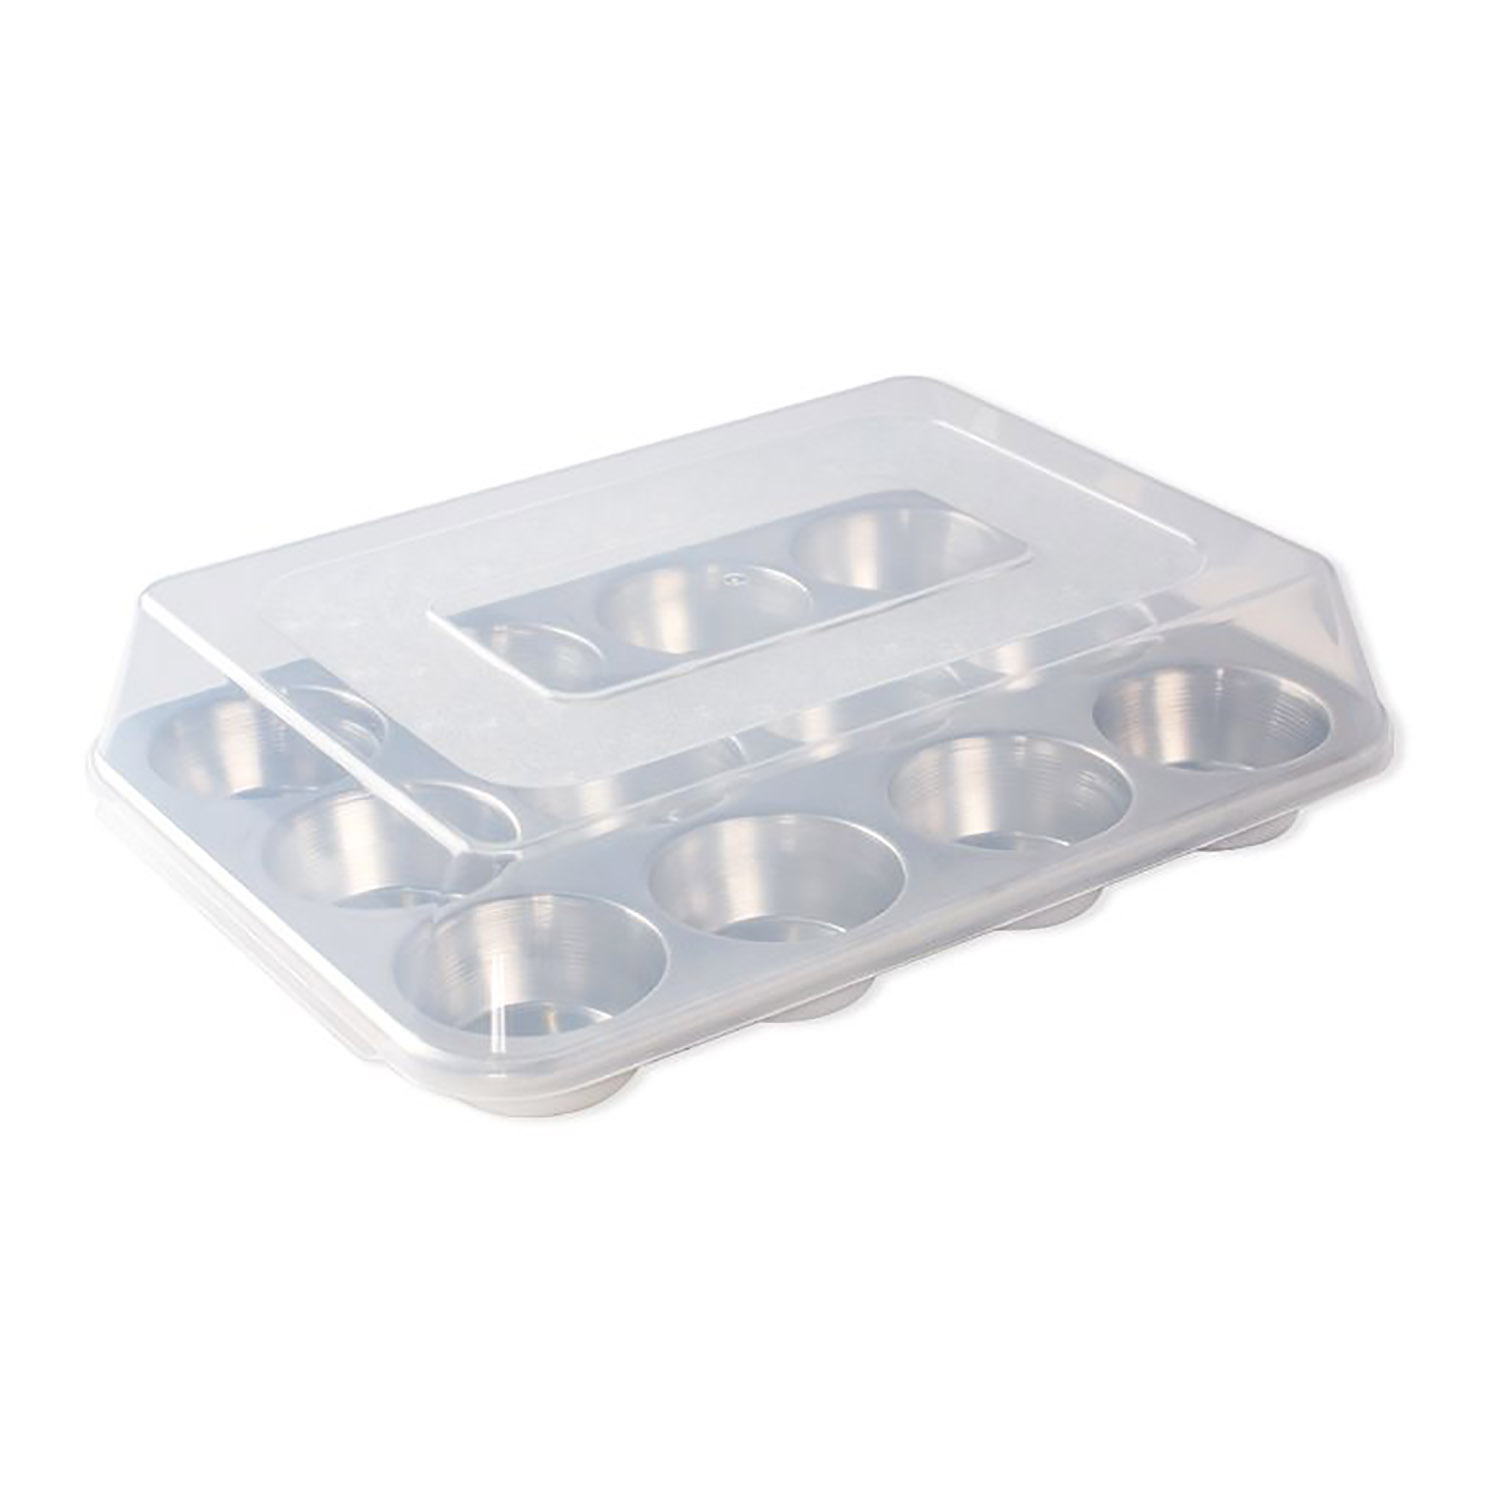 Naturals® Muffin Pan with High-Domed Lid